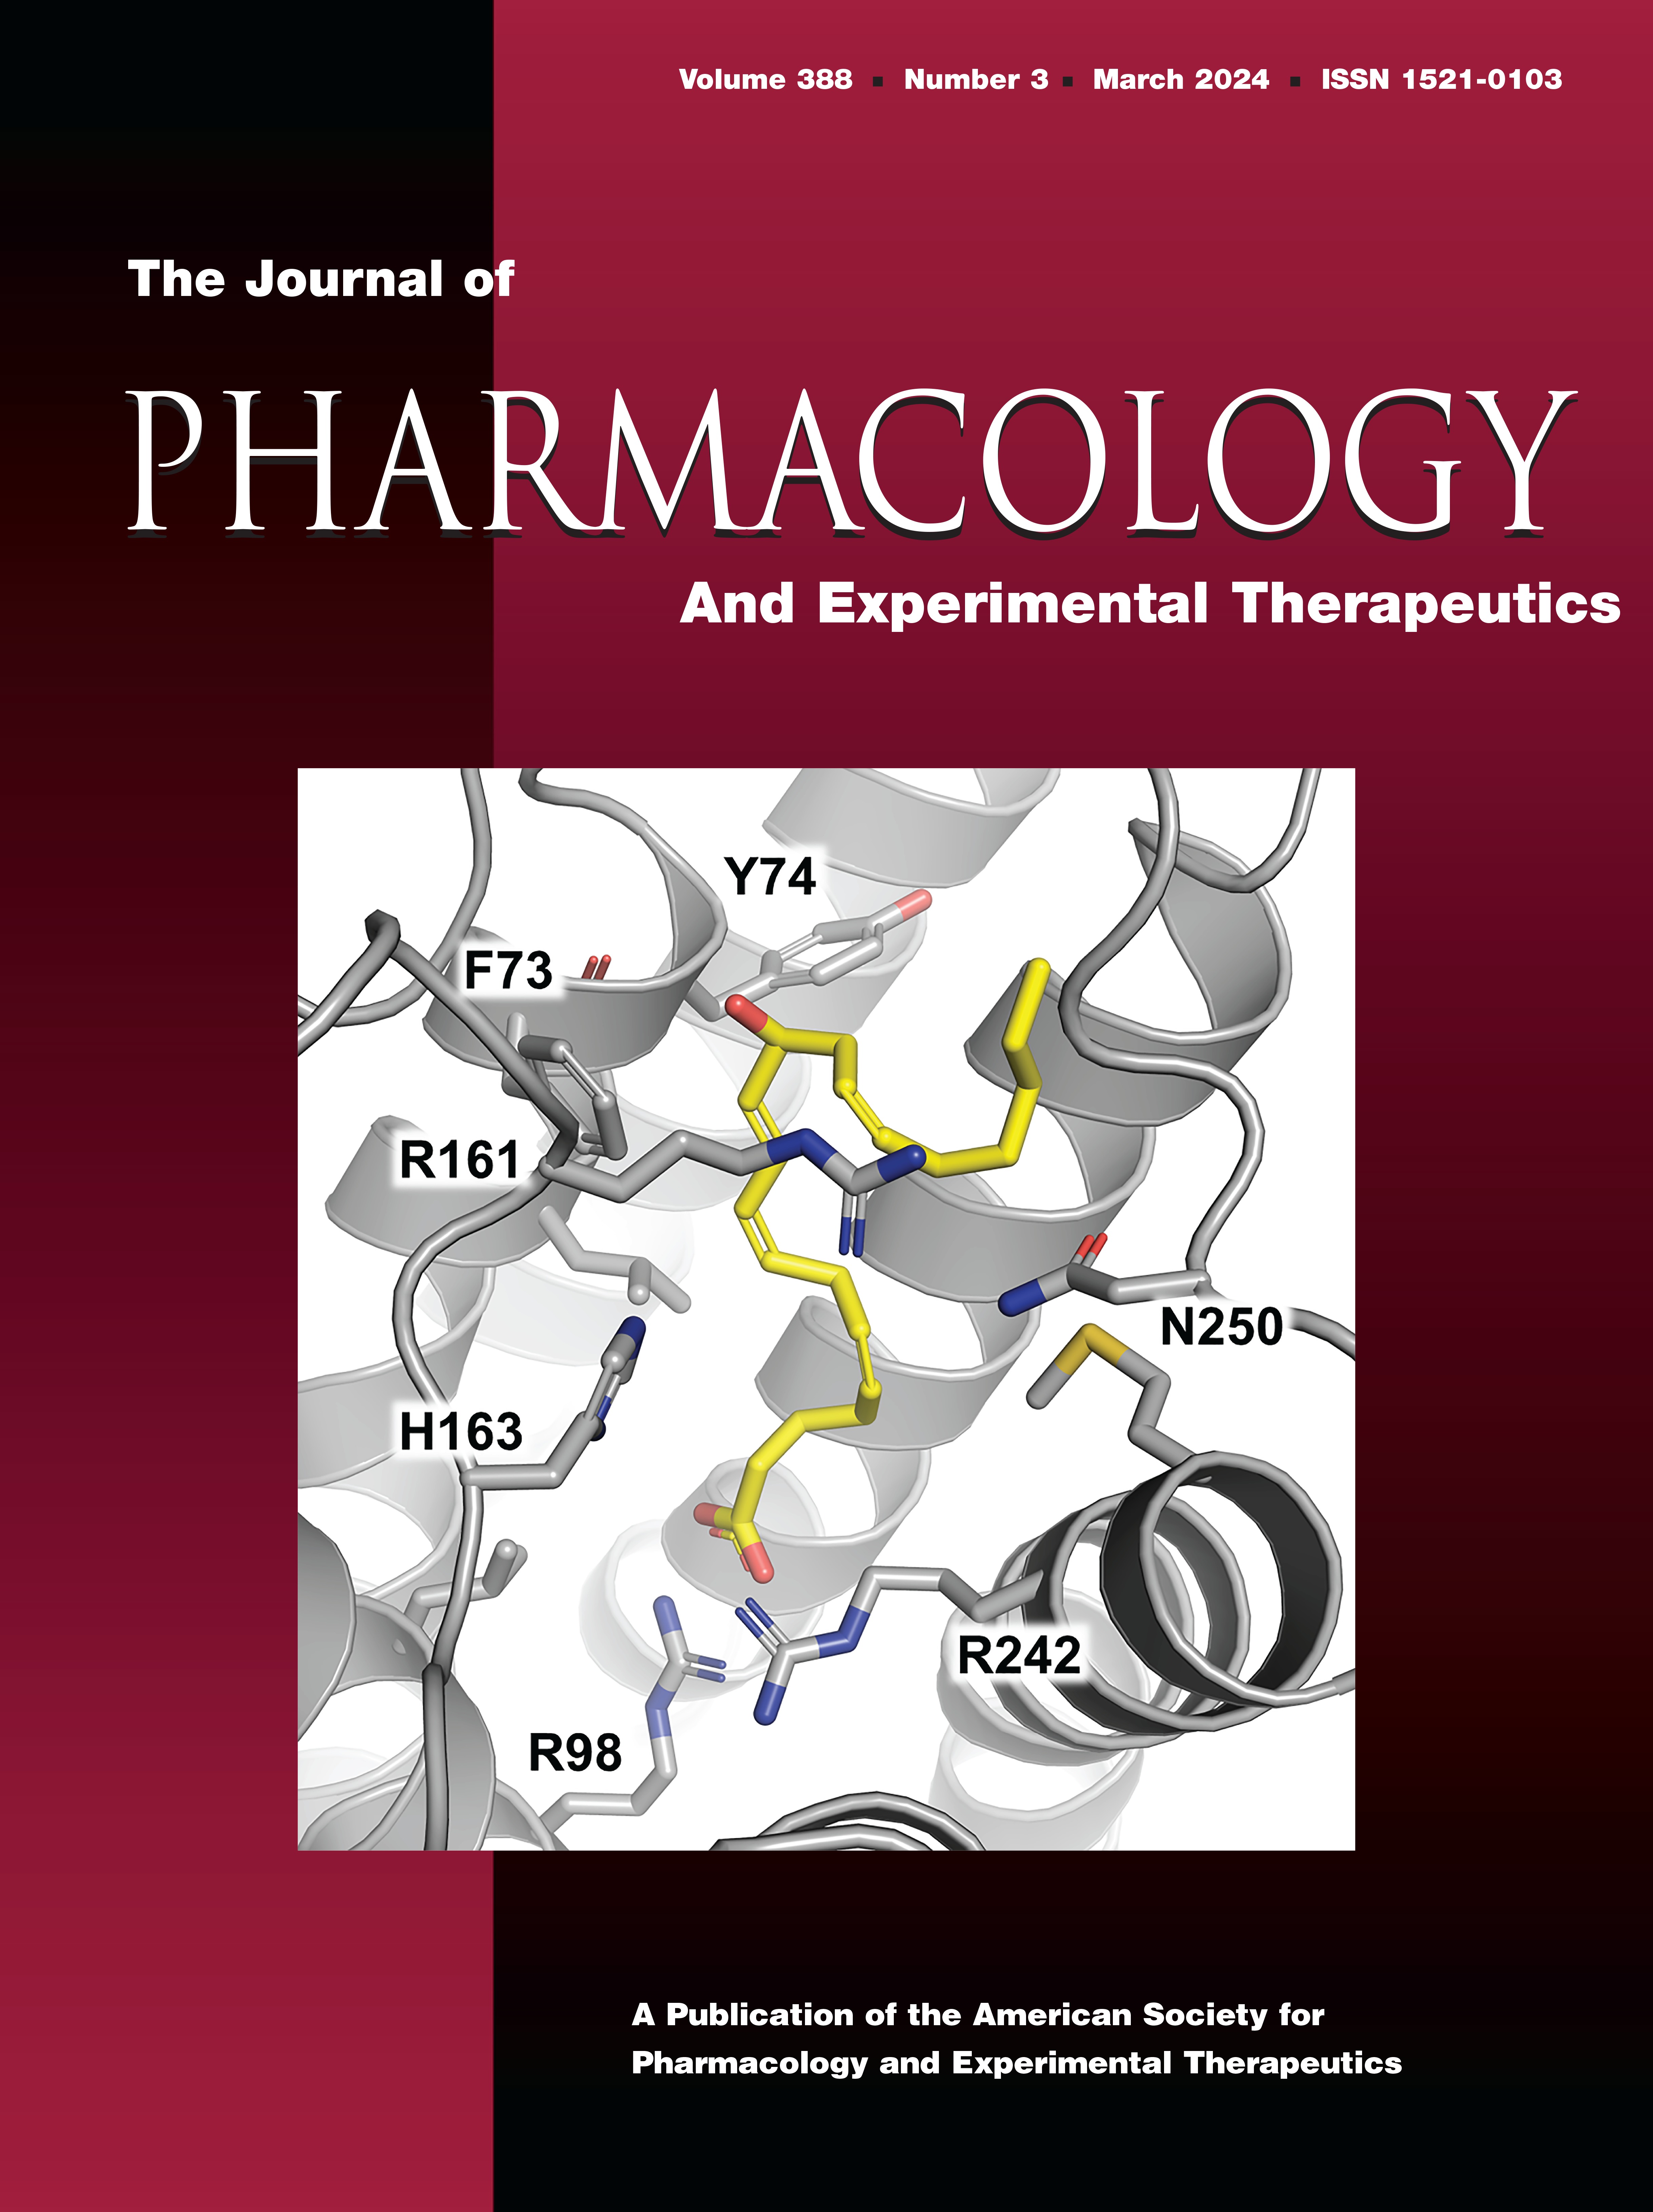 Preclinical Evidence for the Glucocorticoid-Sparing Potential of a Dual Toll-Like Receptor 7/8 Inhibitor in Autoimmune Diseases [Drug Discovery and Translational Medicine]